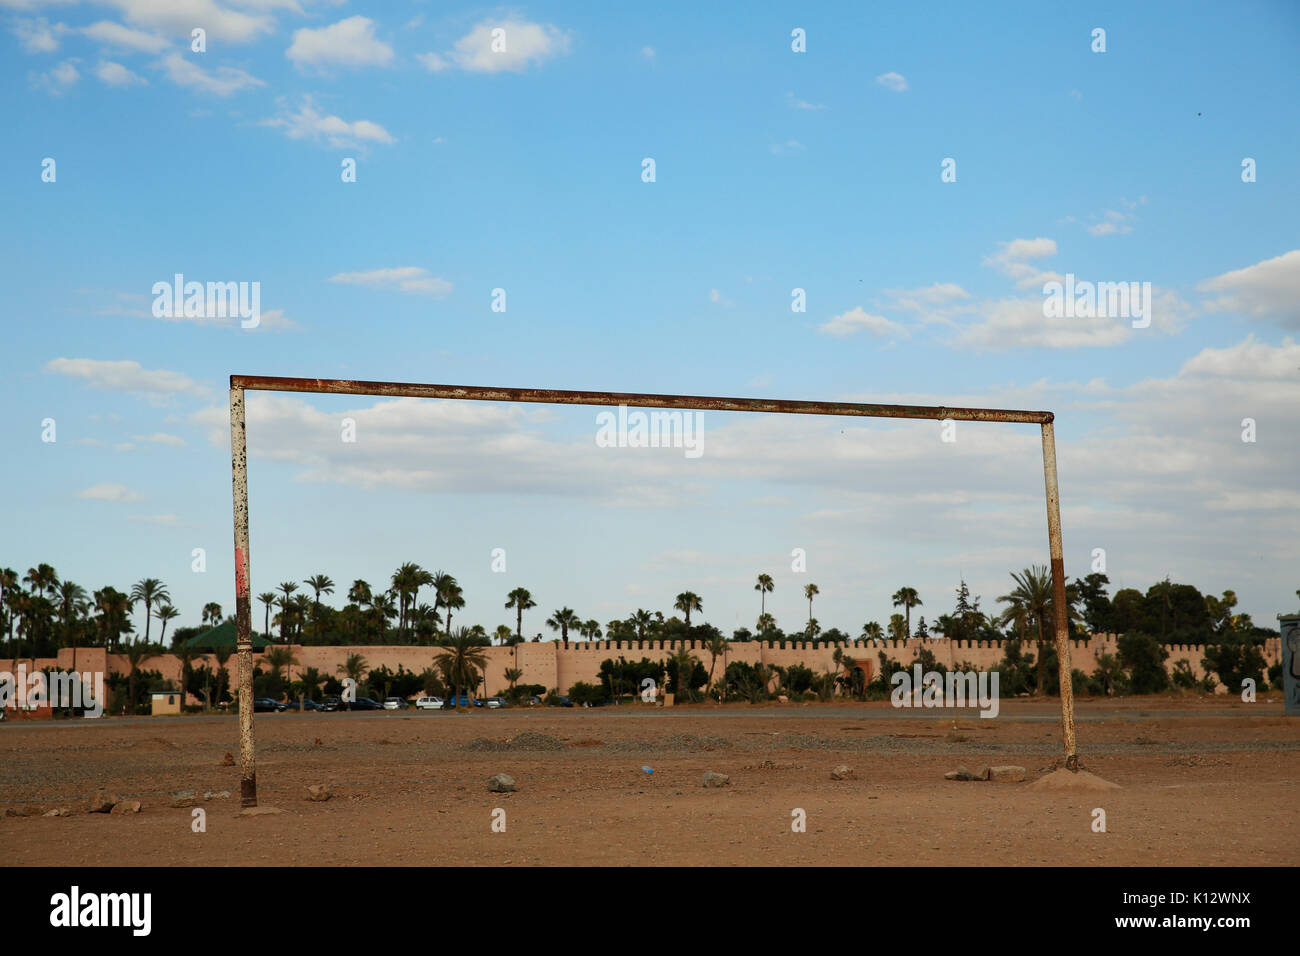 A goal post is pictured on a sandy football pitch outside the walls of the medina at Marrakech in Morocco.  Photograph : © Luke MacGregor +44 (0) 79 7 Stock Photo